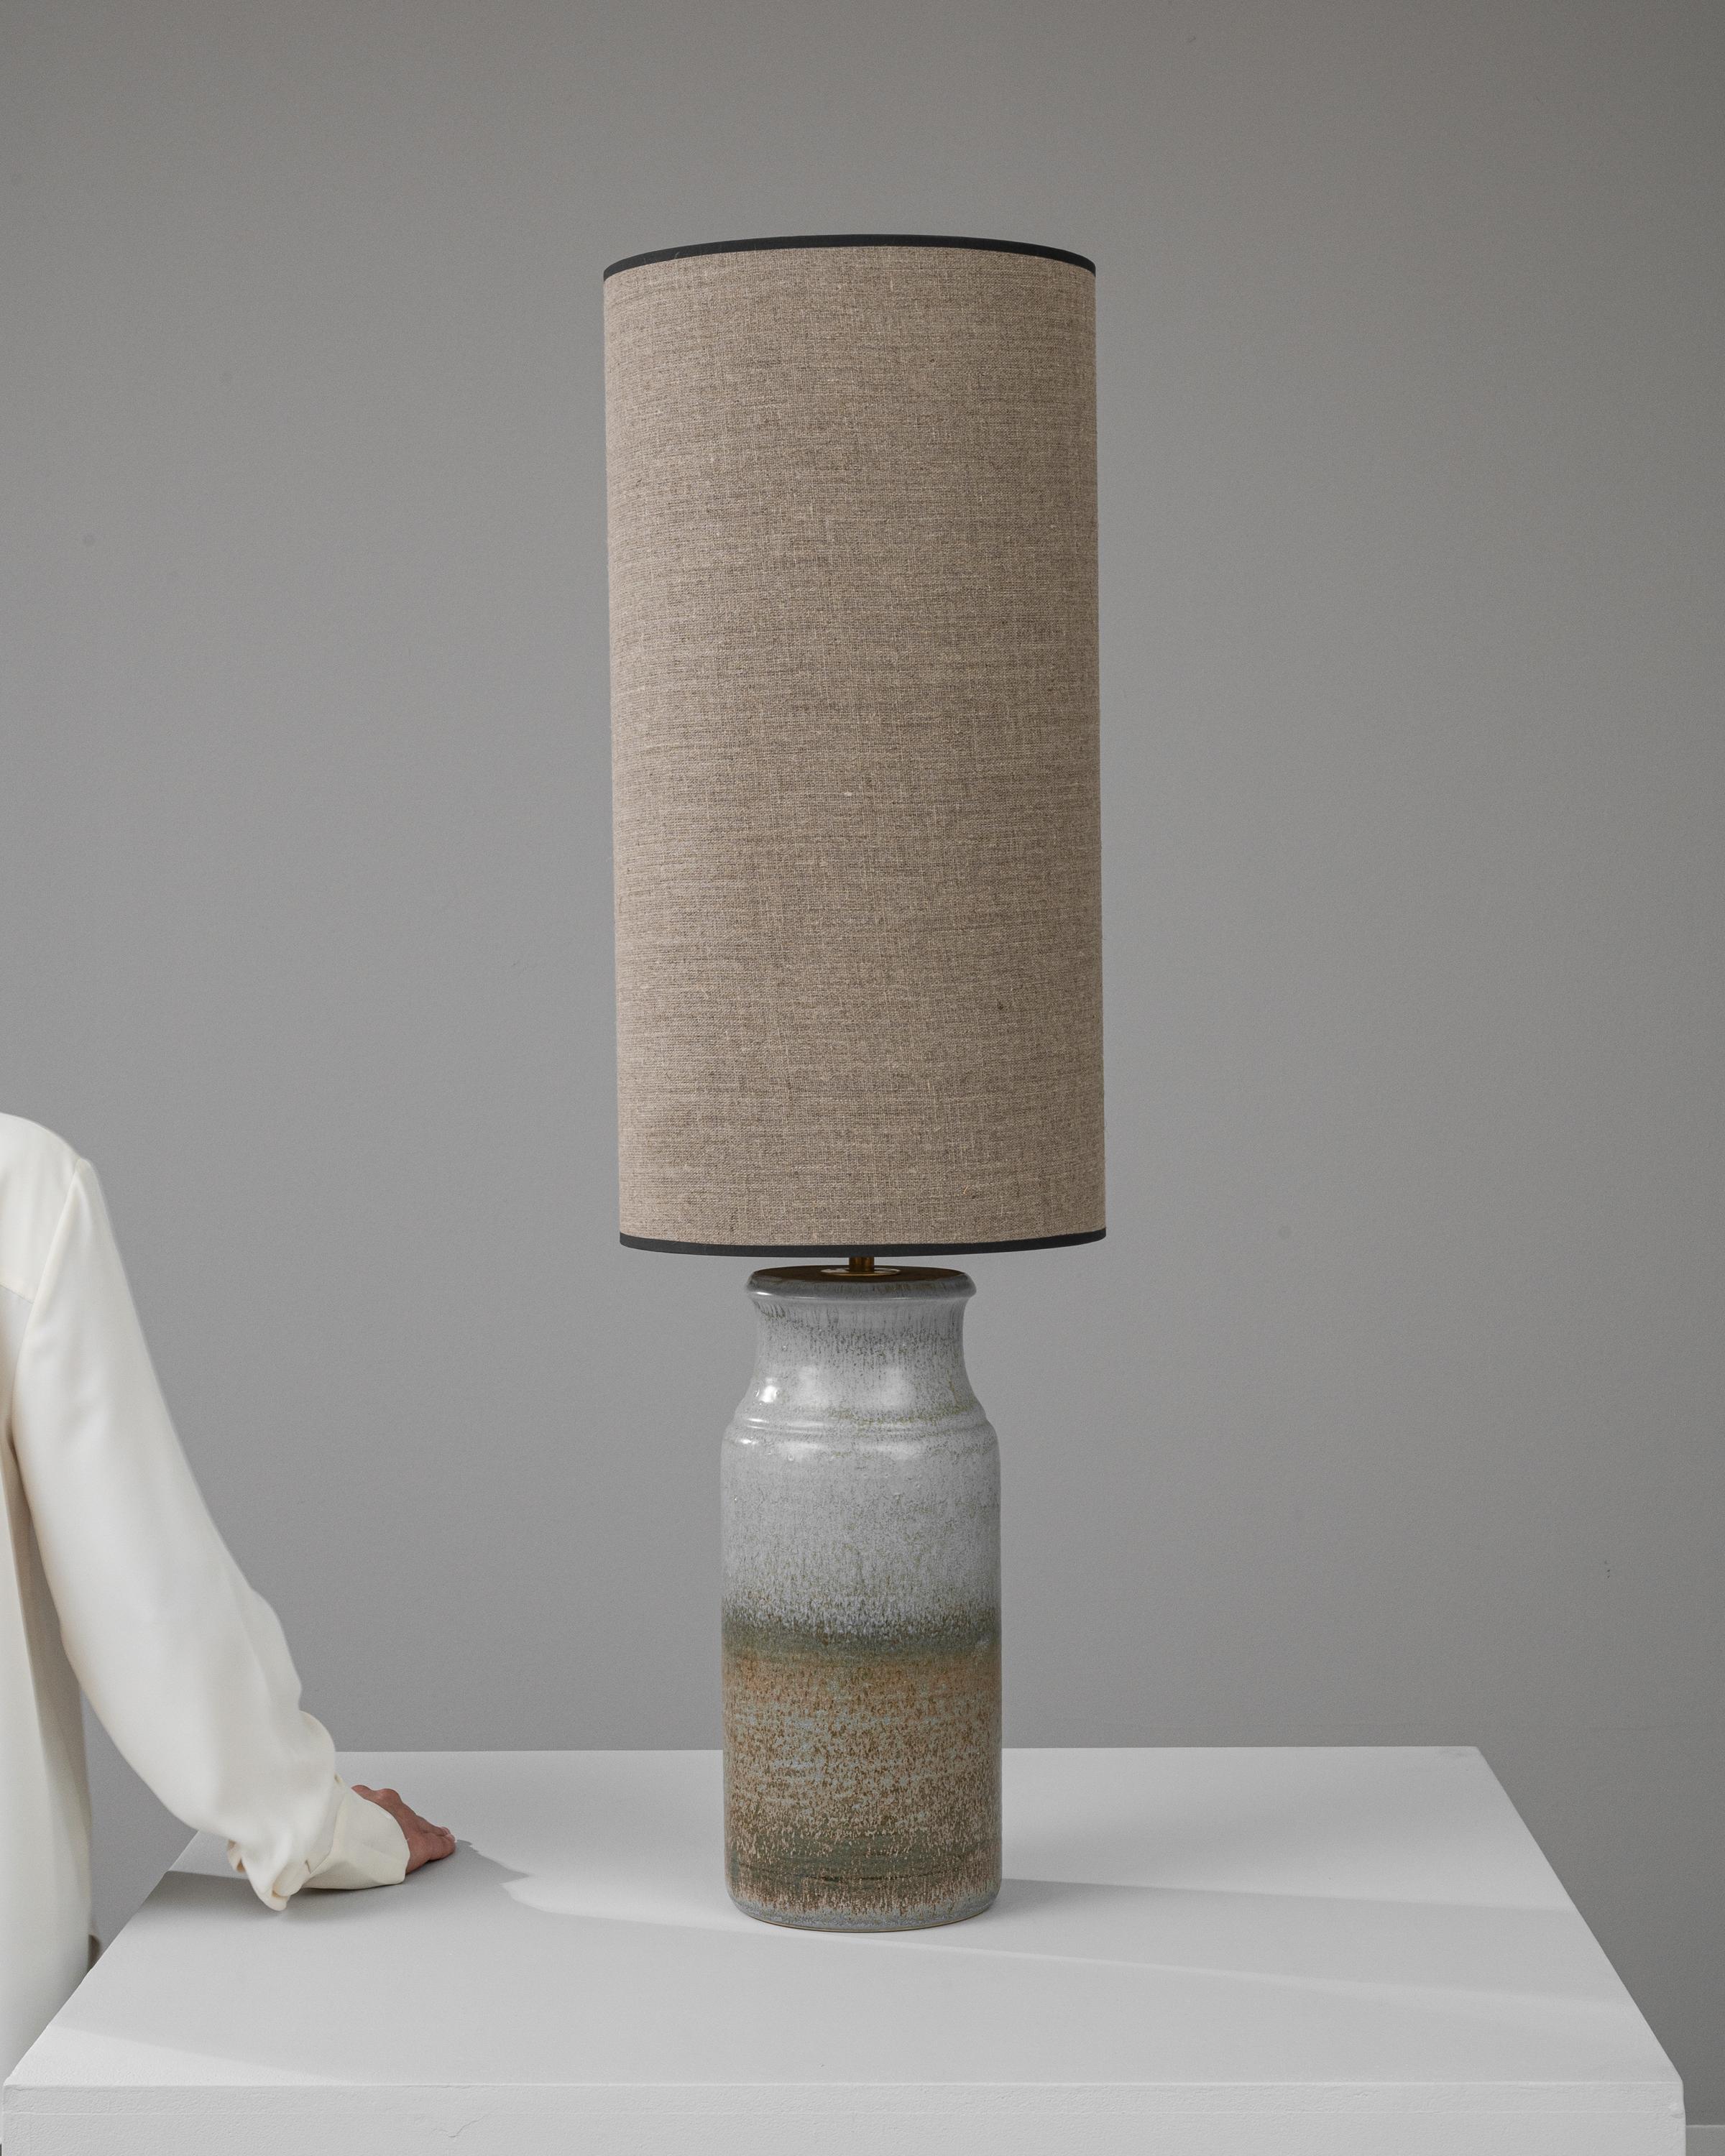 Introducing the 20th Century German Ceramic Table Lamp: an embodiment of rustic charm and minimalist elegance. This lamp showcases a stunning ceramic base with a gradient of earthy tones, layered to create a serene visual effect reminiscent of